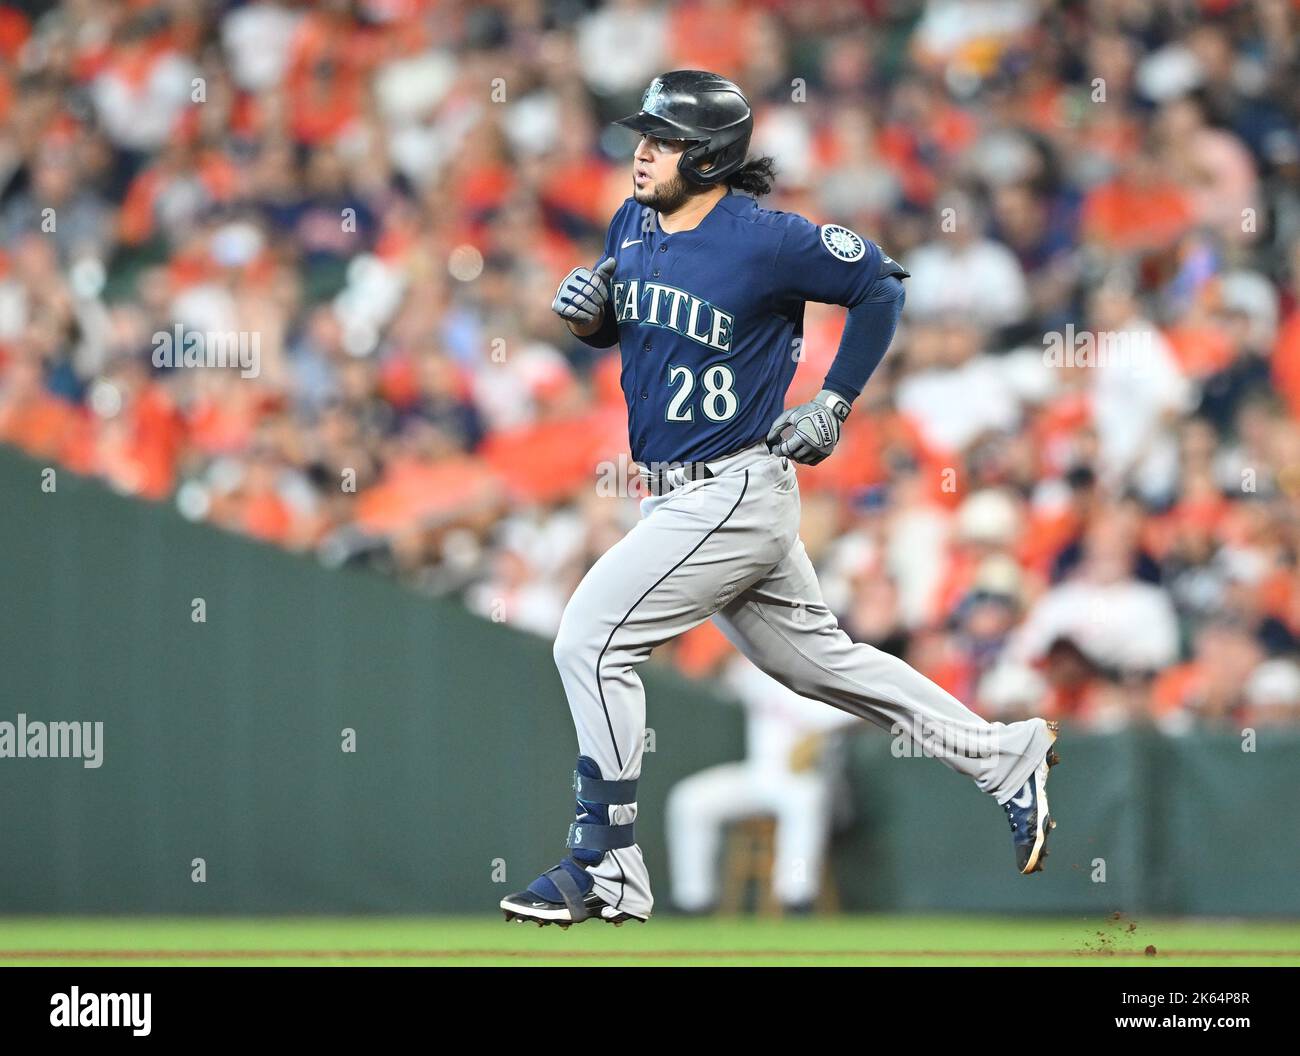 Seattle Mariners third baseman Eugenio Suarez jogs the bases after hitting  a home run against the Washington Nationals in a baseball game Monday, June  26, 2023, in Seattle. The Mariners won 8-4. (